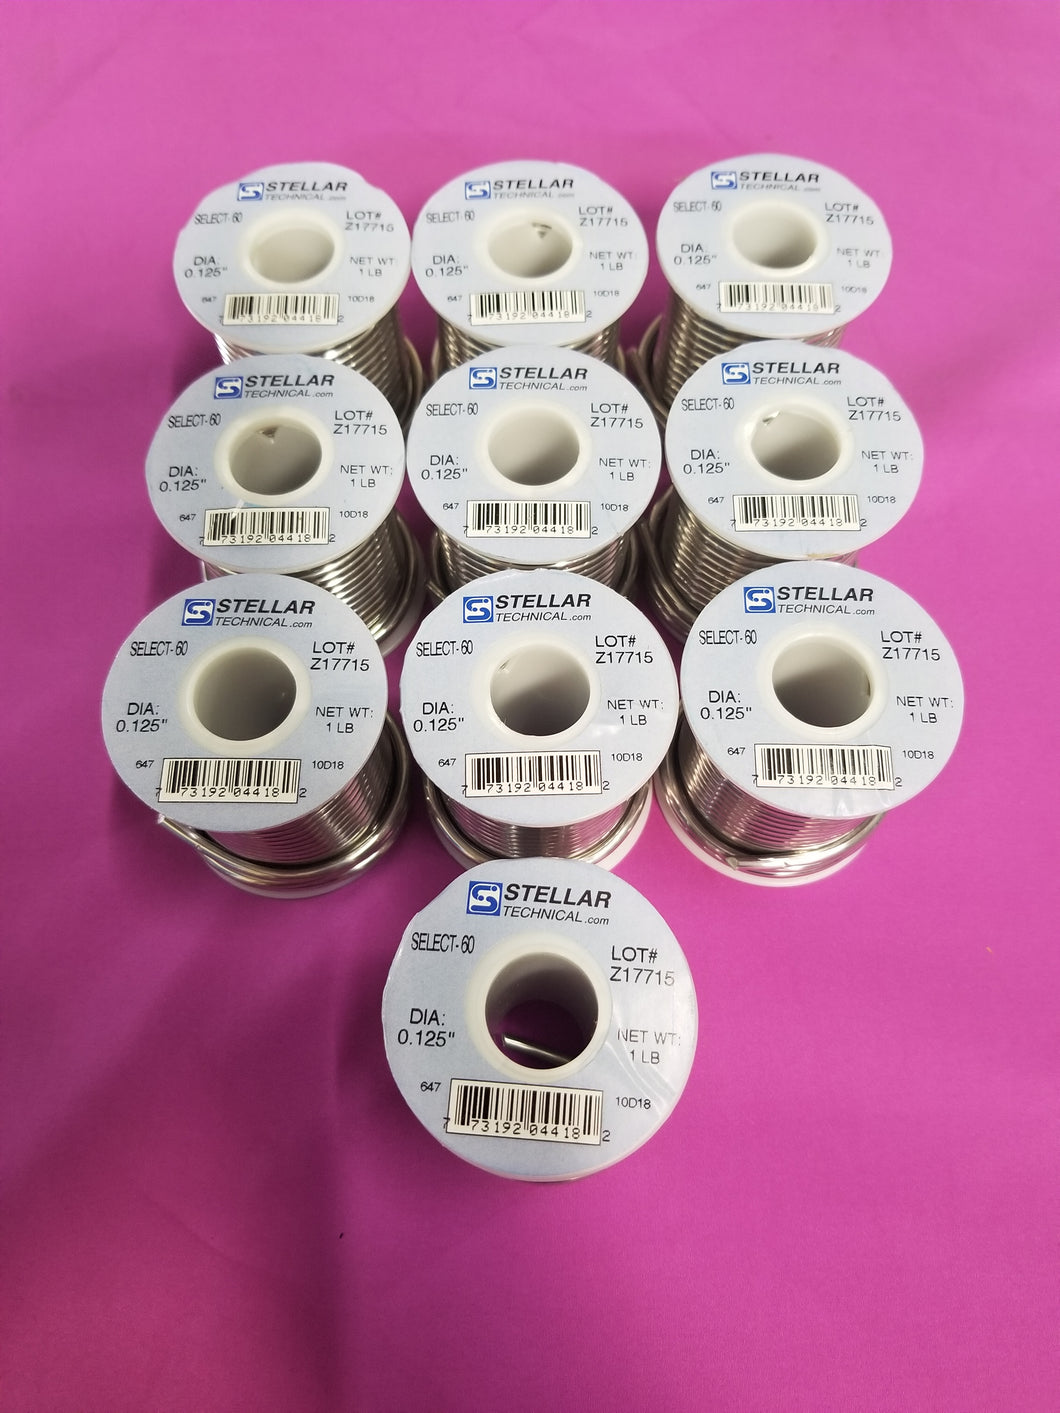 Premium 60/40 Tin Lead Solder Wire - Stained Glass Solder